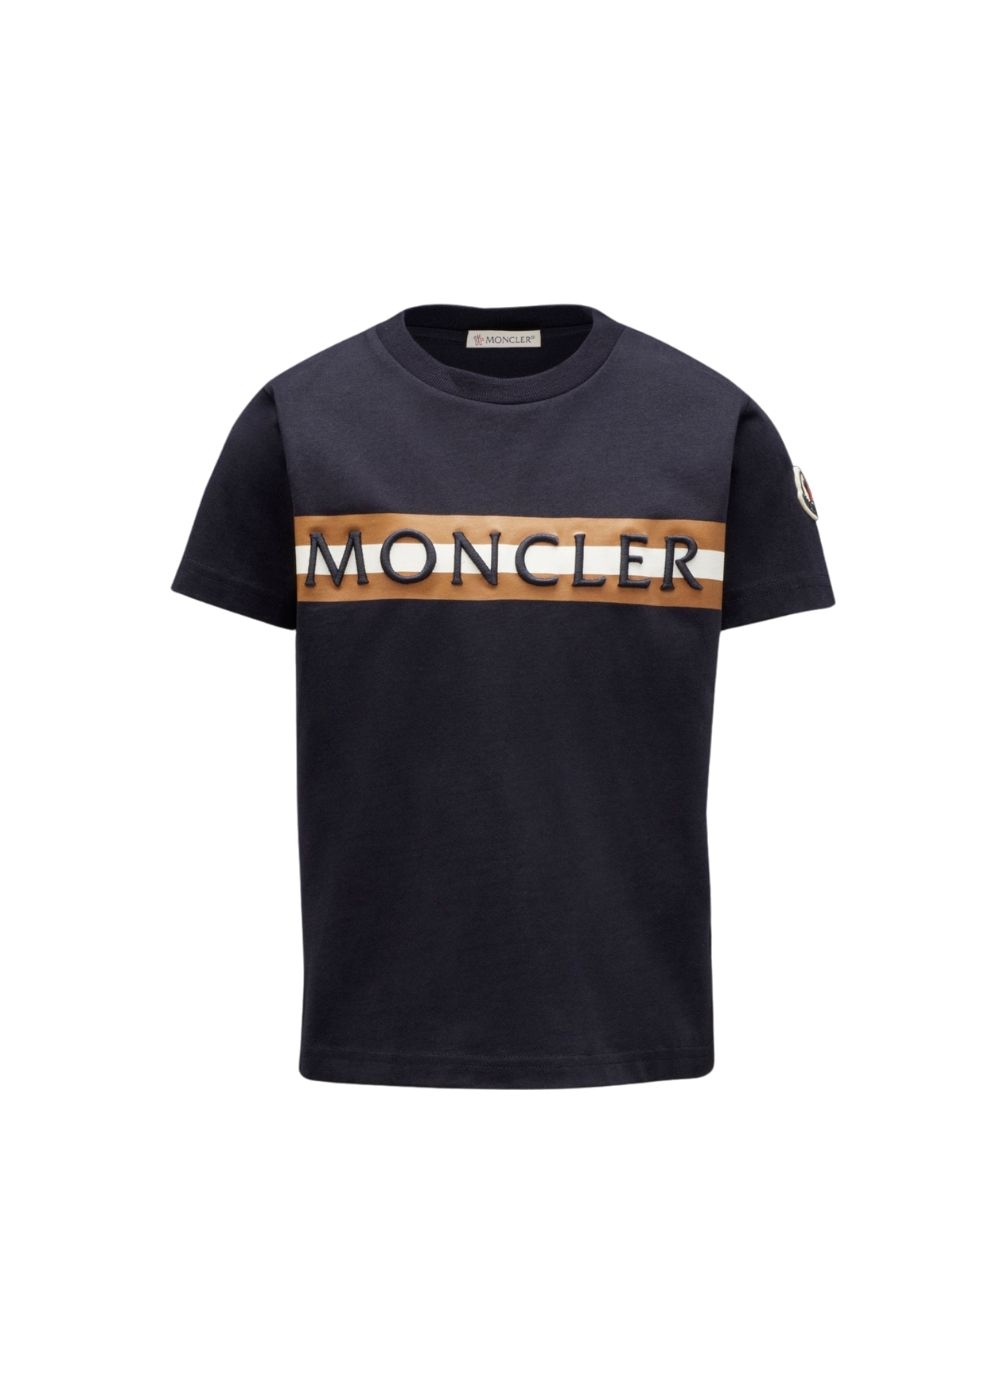 Featured image for “MONCLER T-SHIRT CON RICAMO”